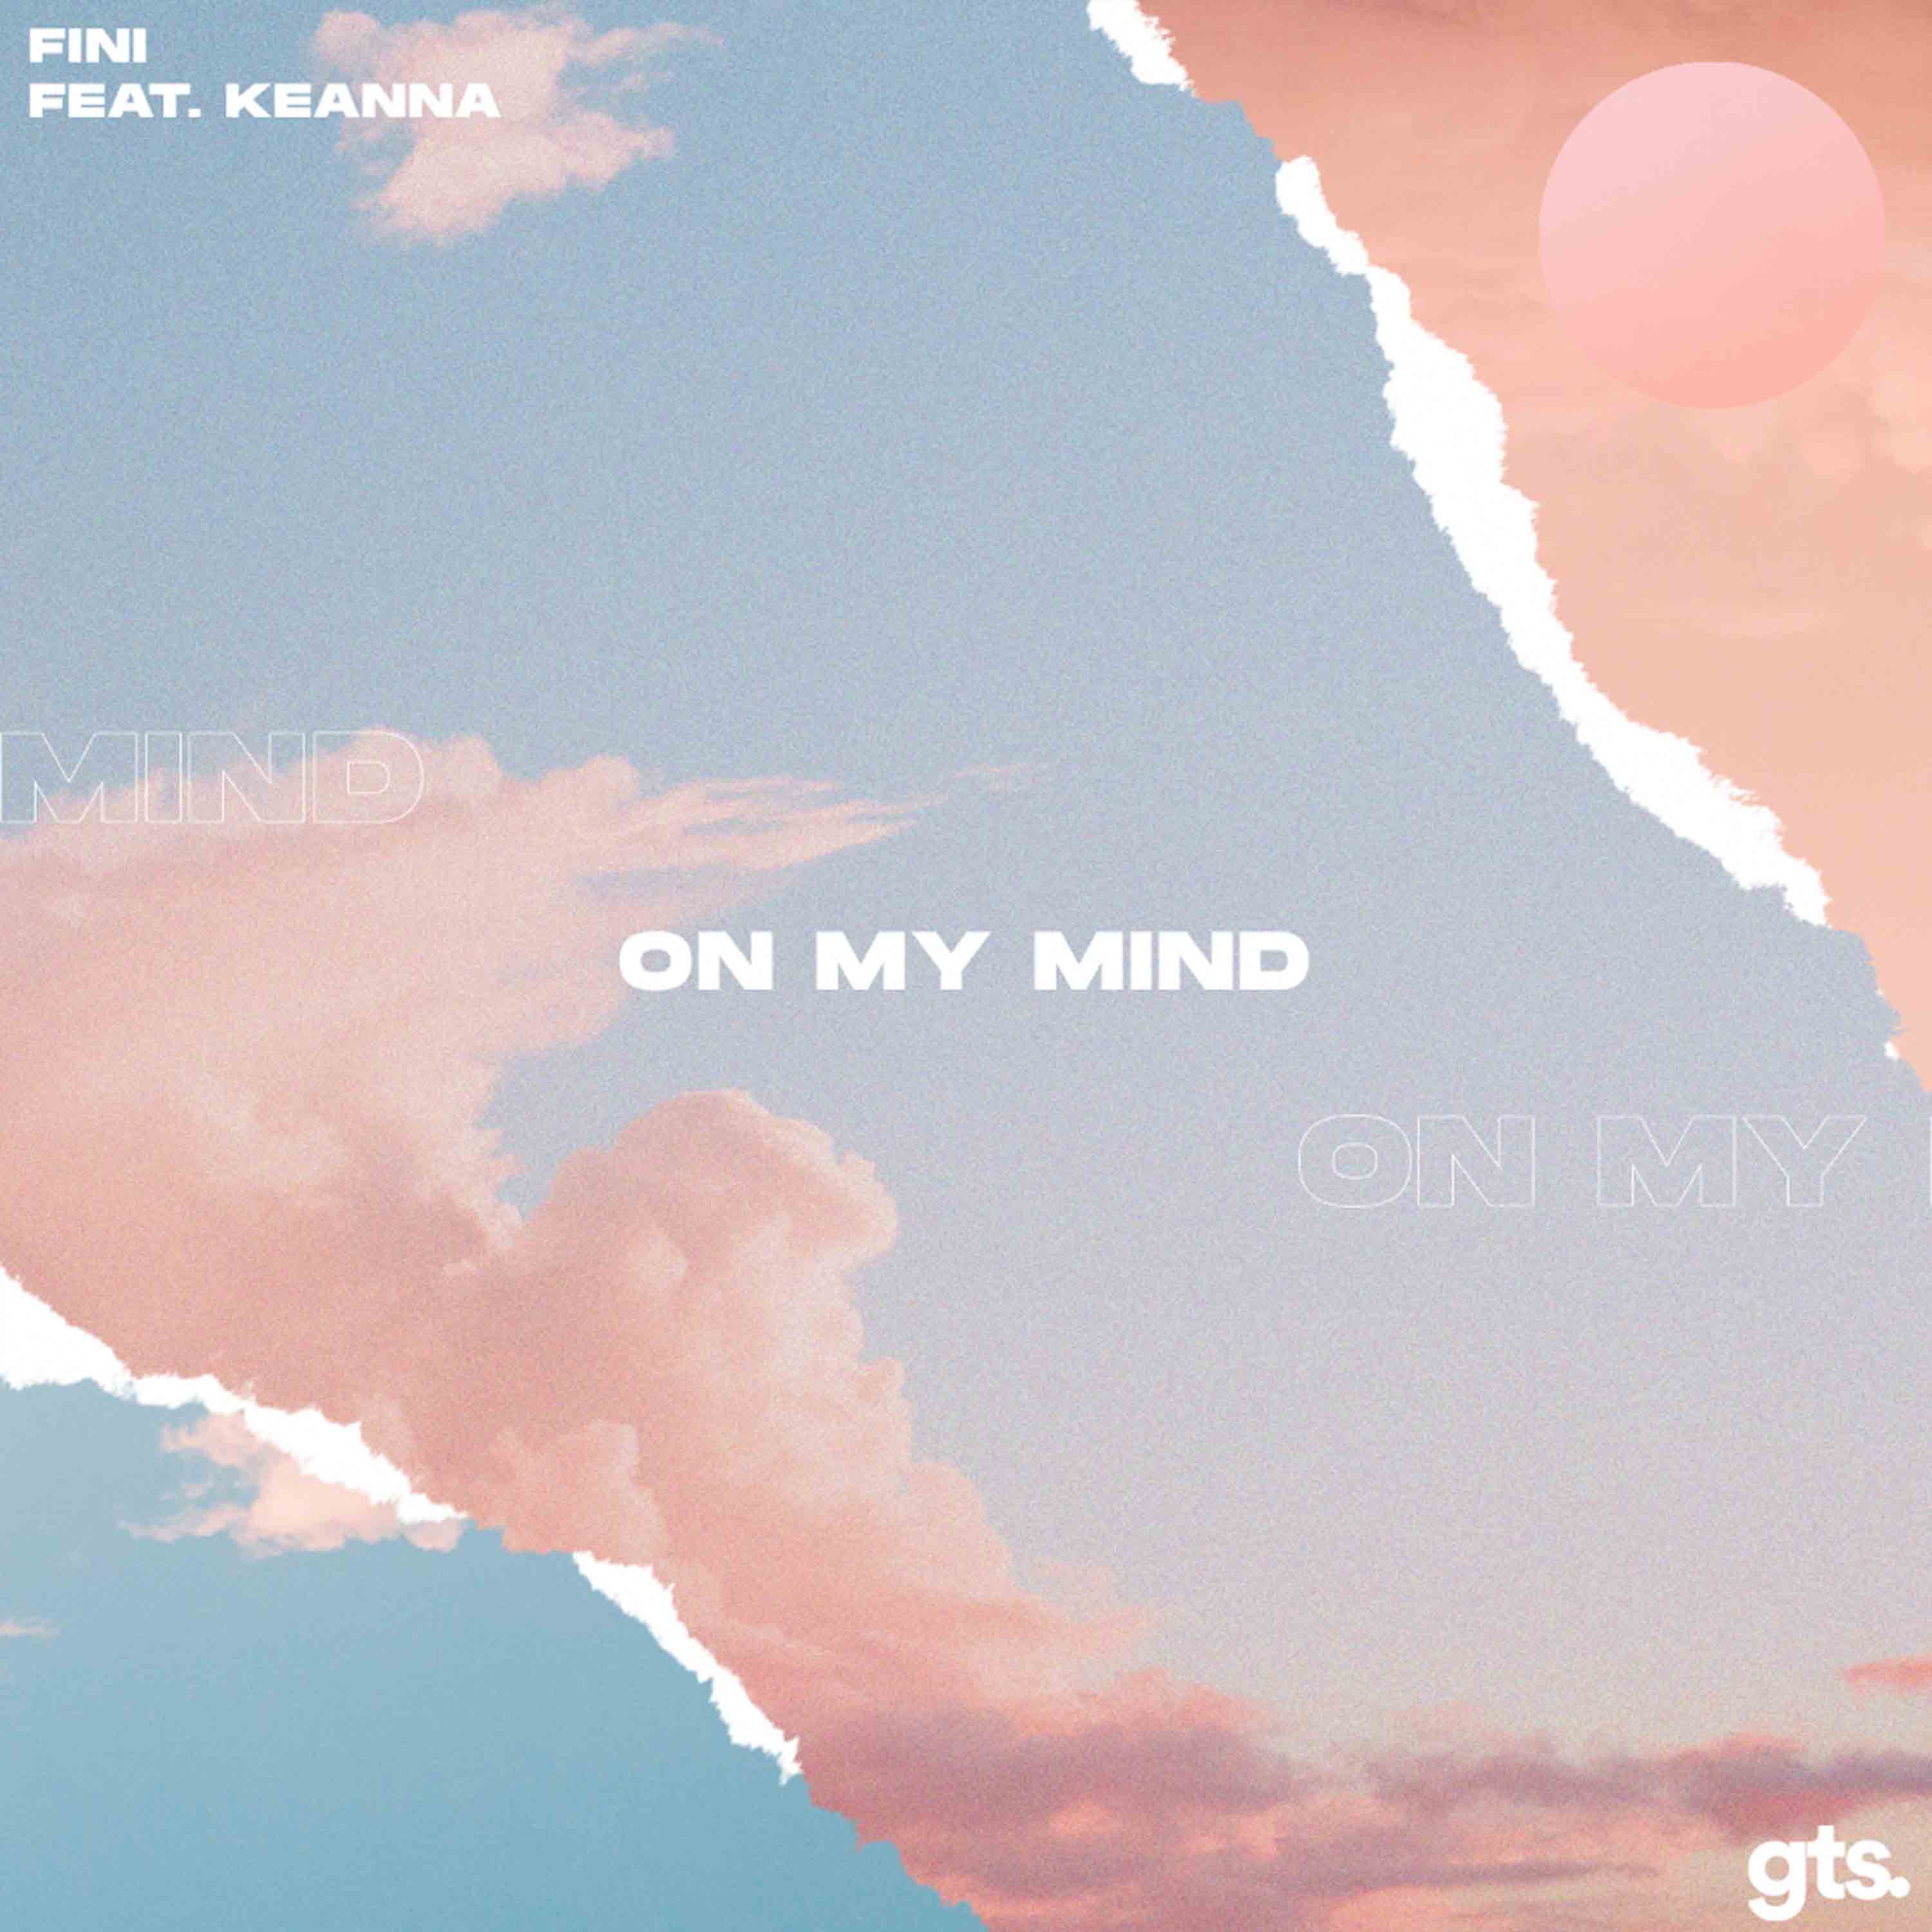 On my mind - song